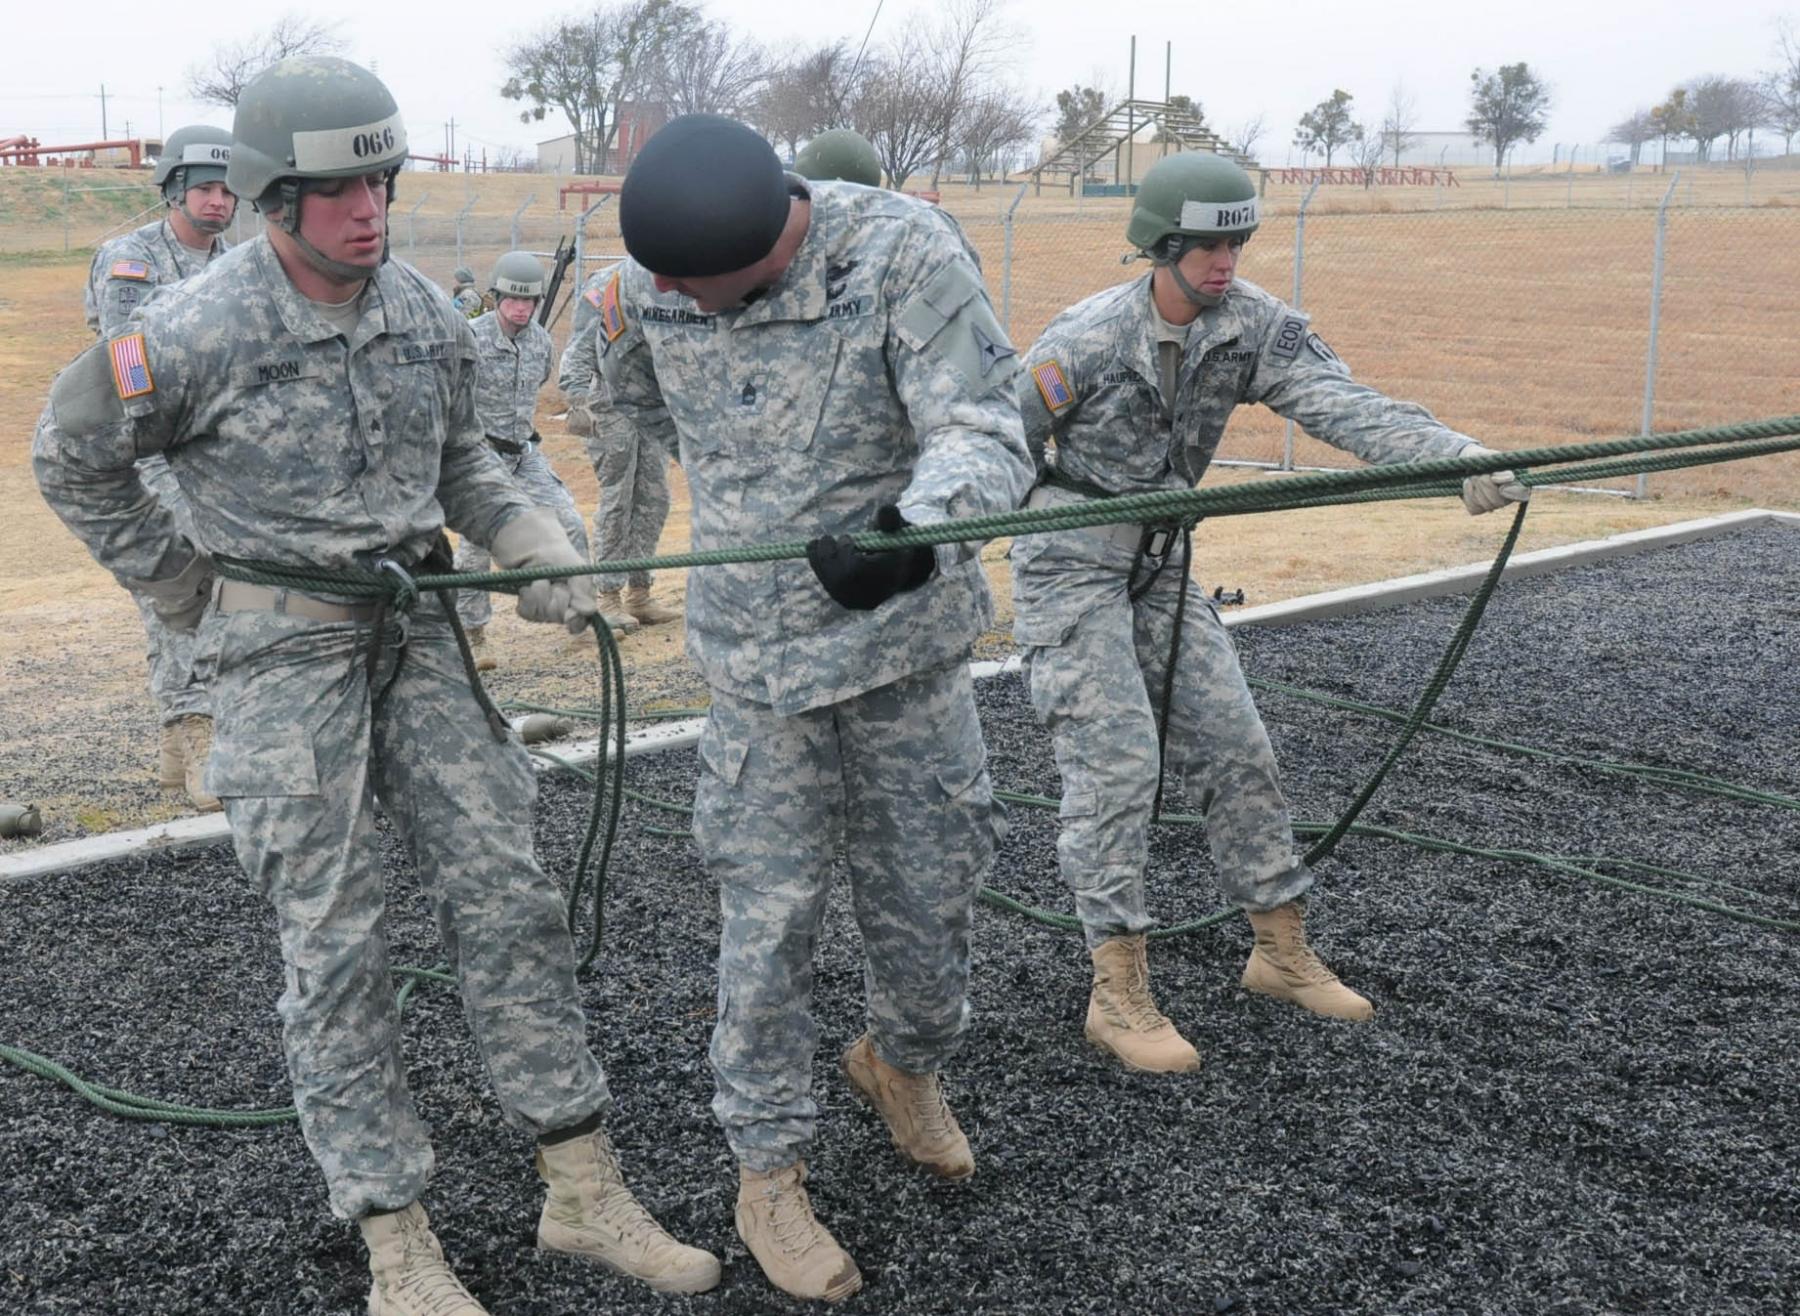 Air Assault training challenges Soldiers at 'Great Place' | Article ...